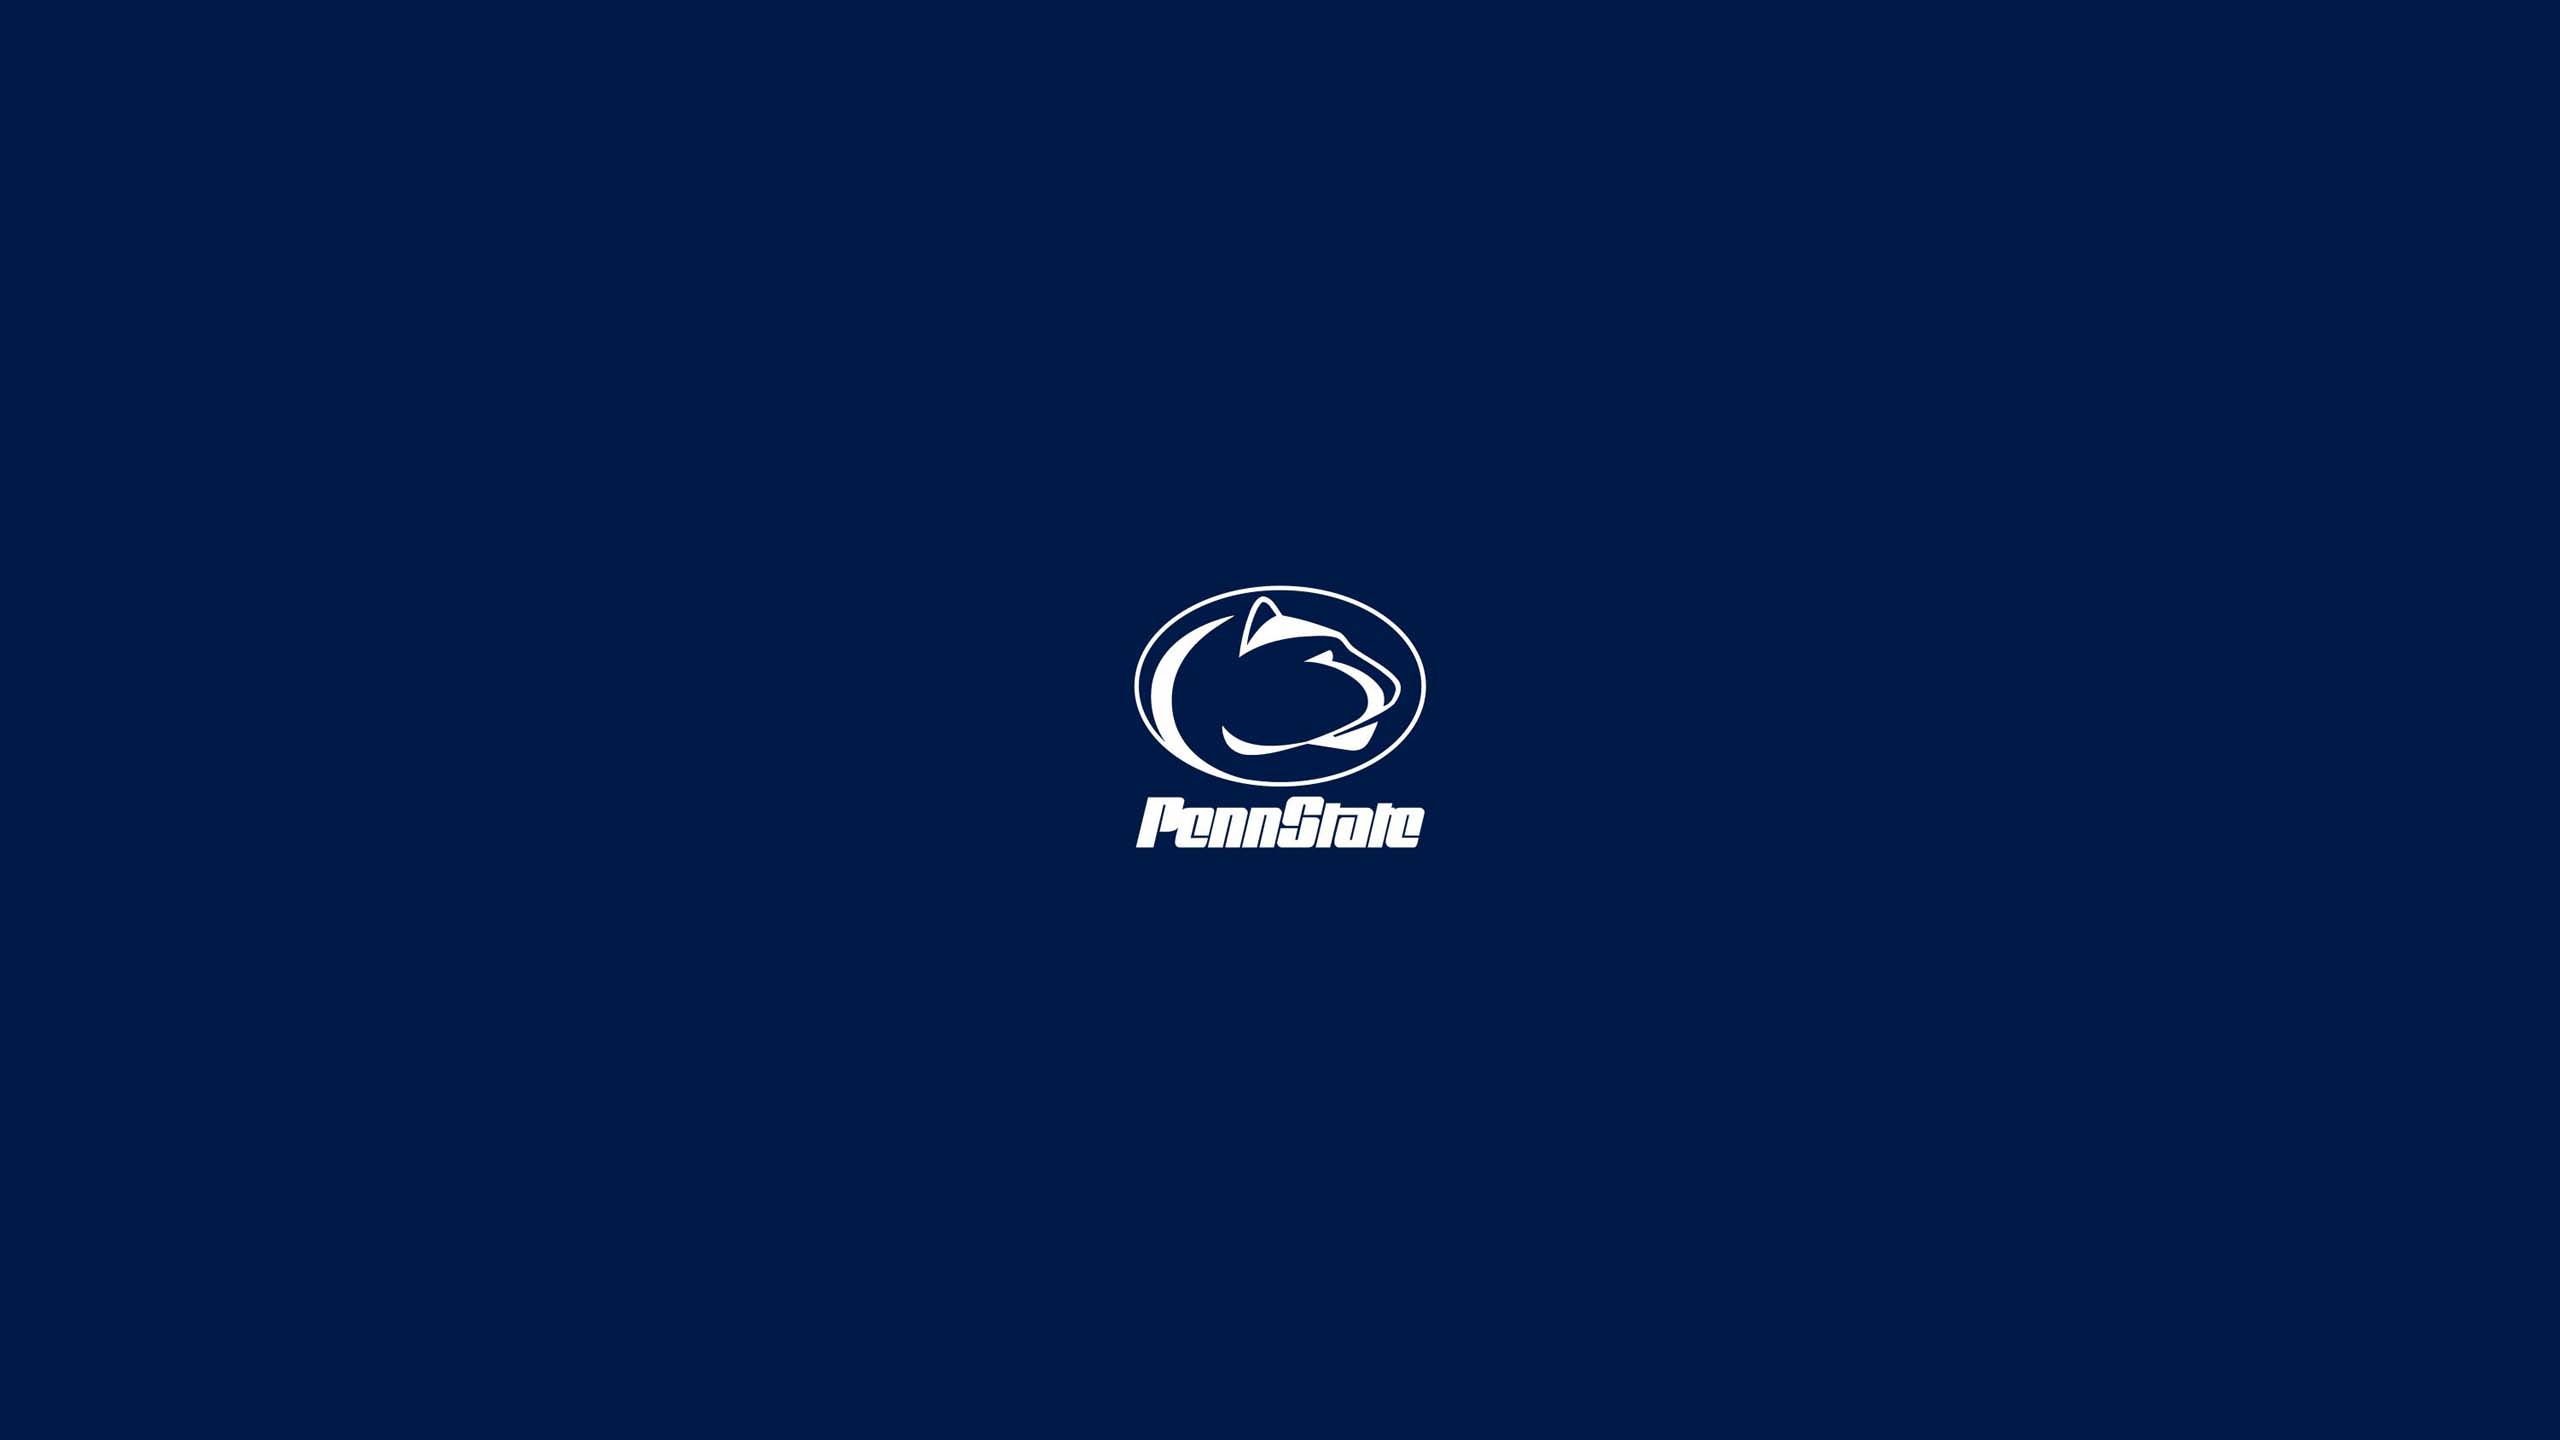 Penn State Wallpaper Image Thecelebritypix